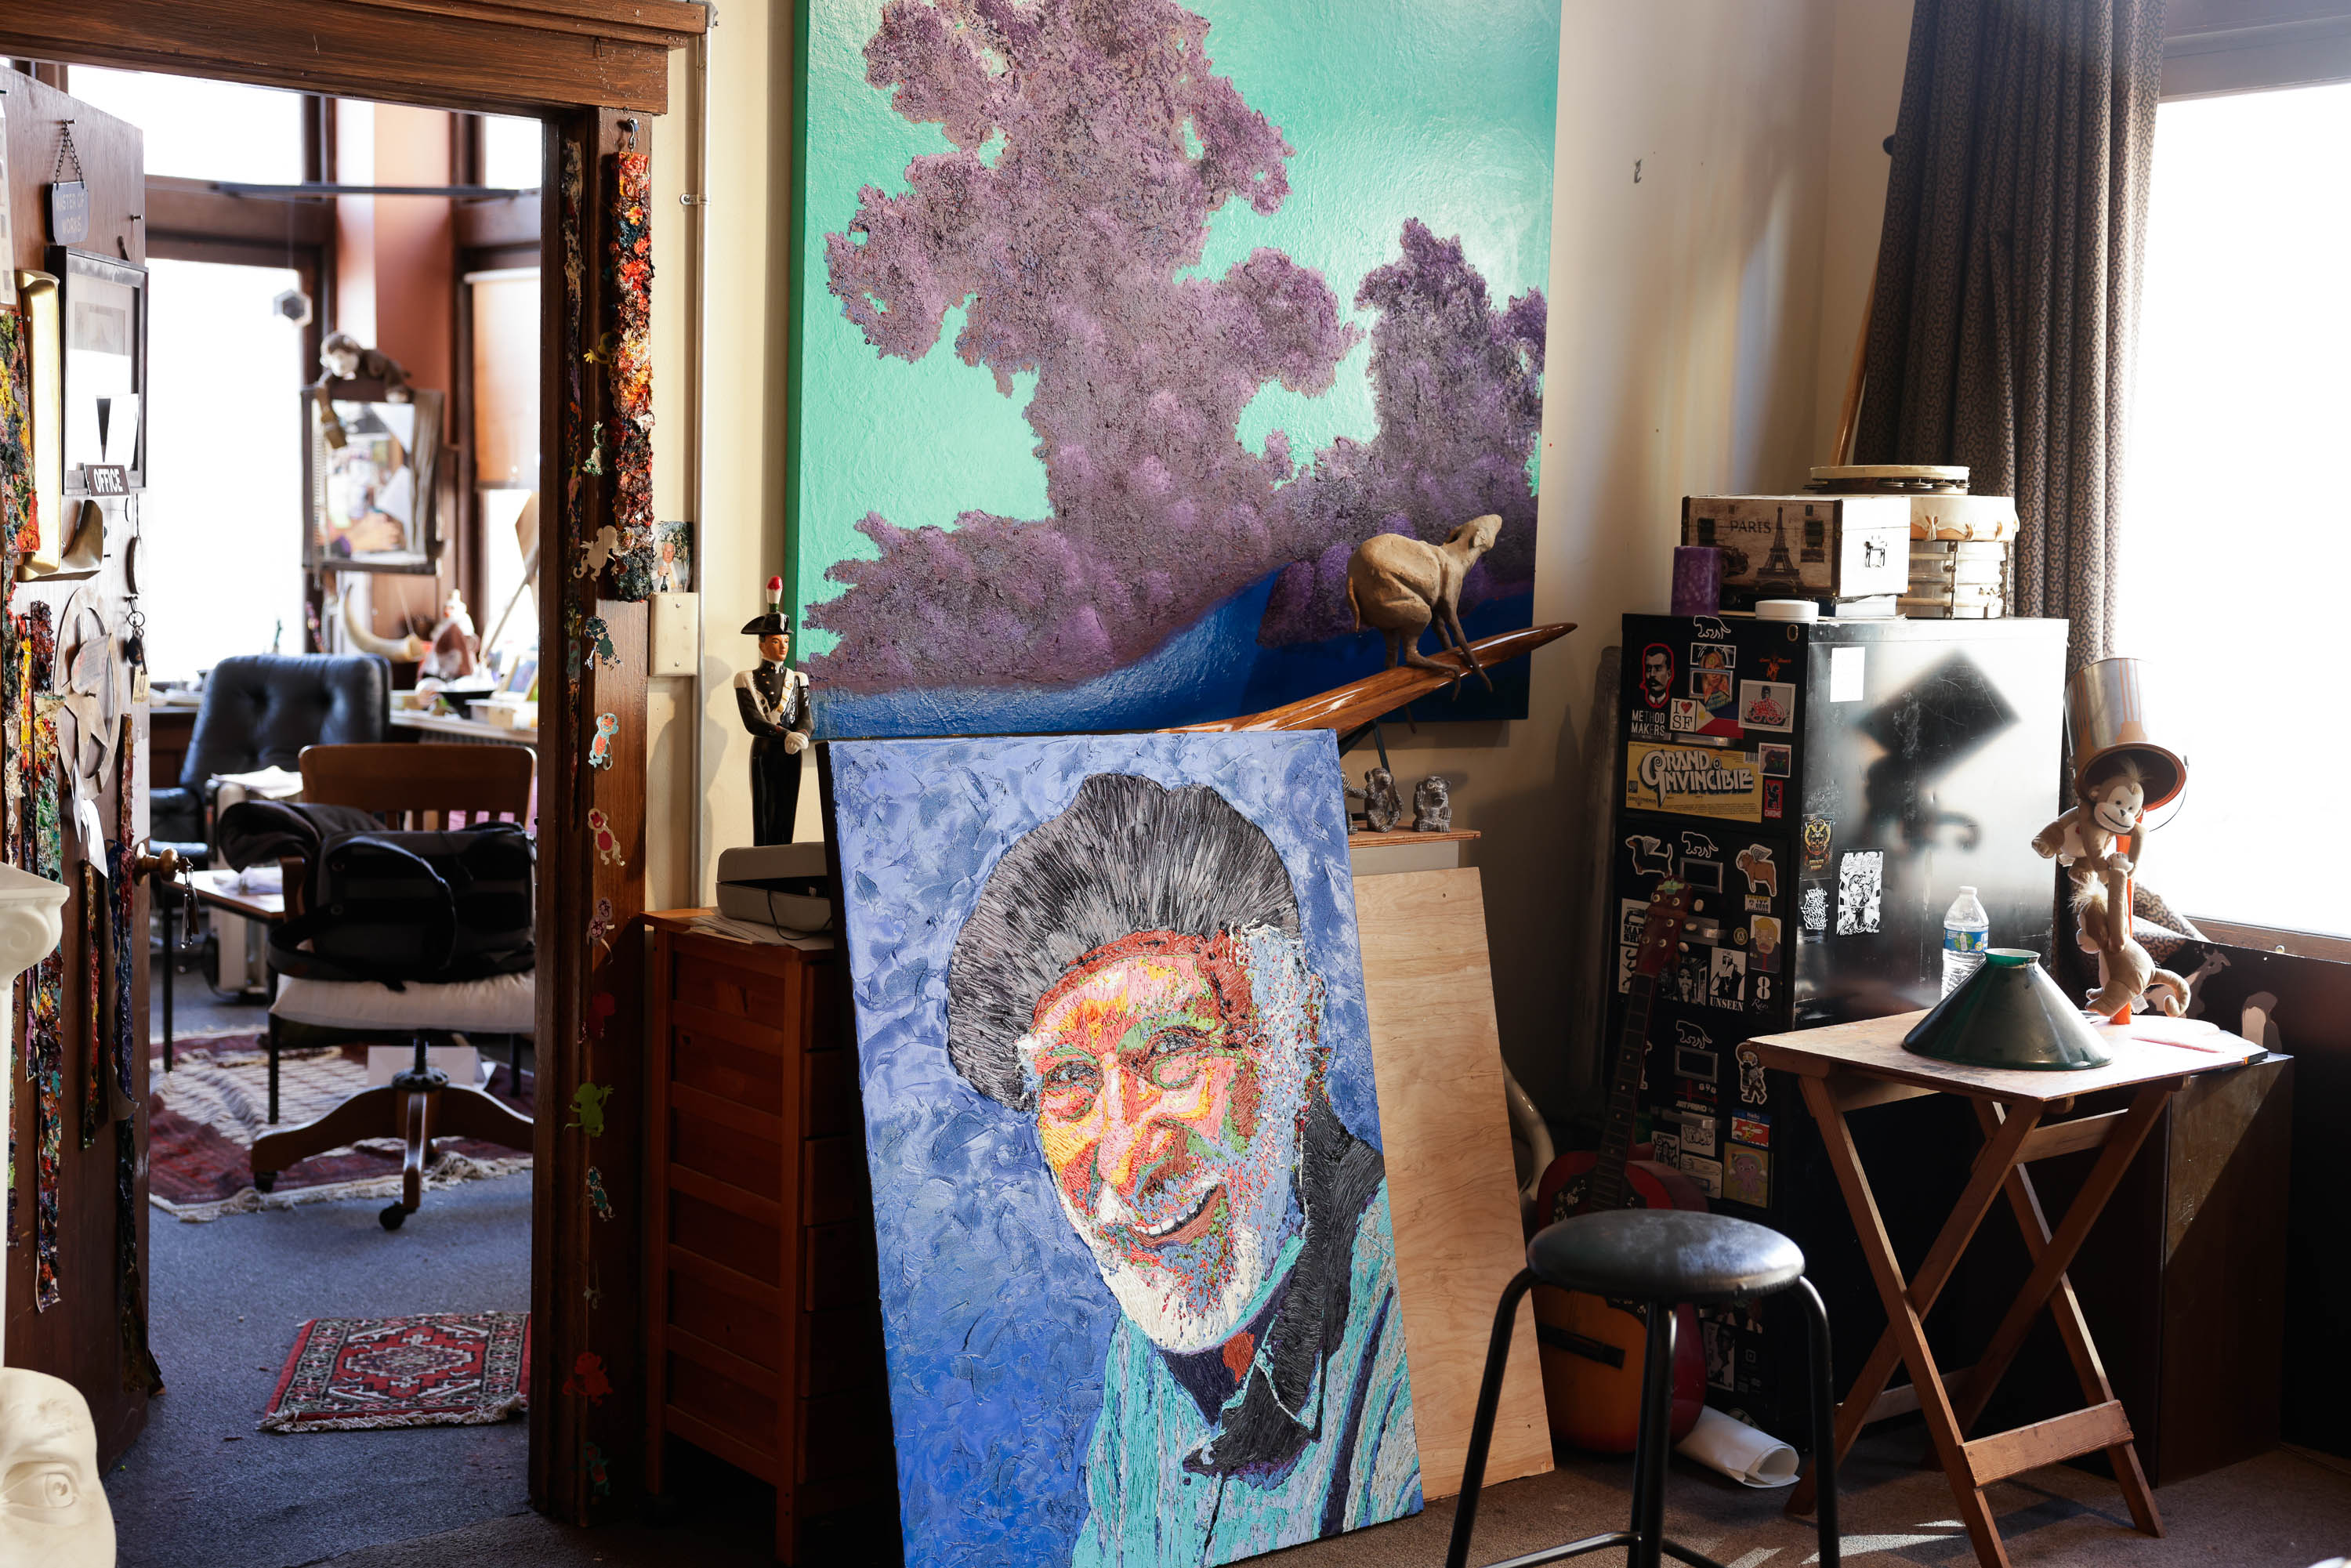 An artist's studio with colorful paintings, eclectic decor, and a portrait of a smiling man on an easel.